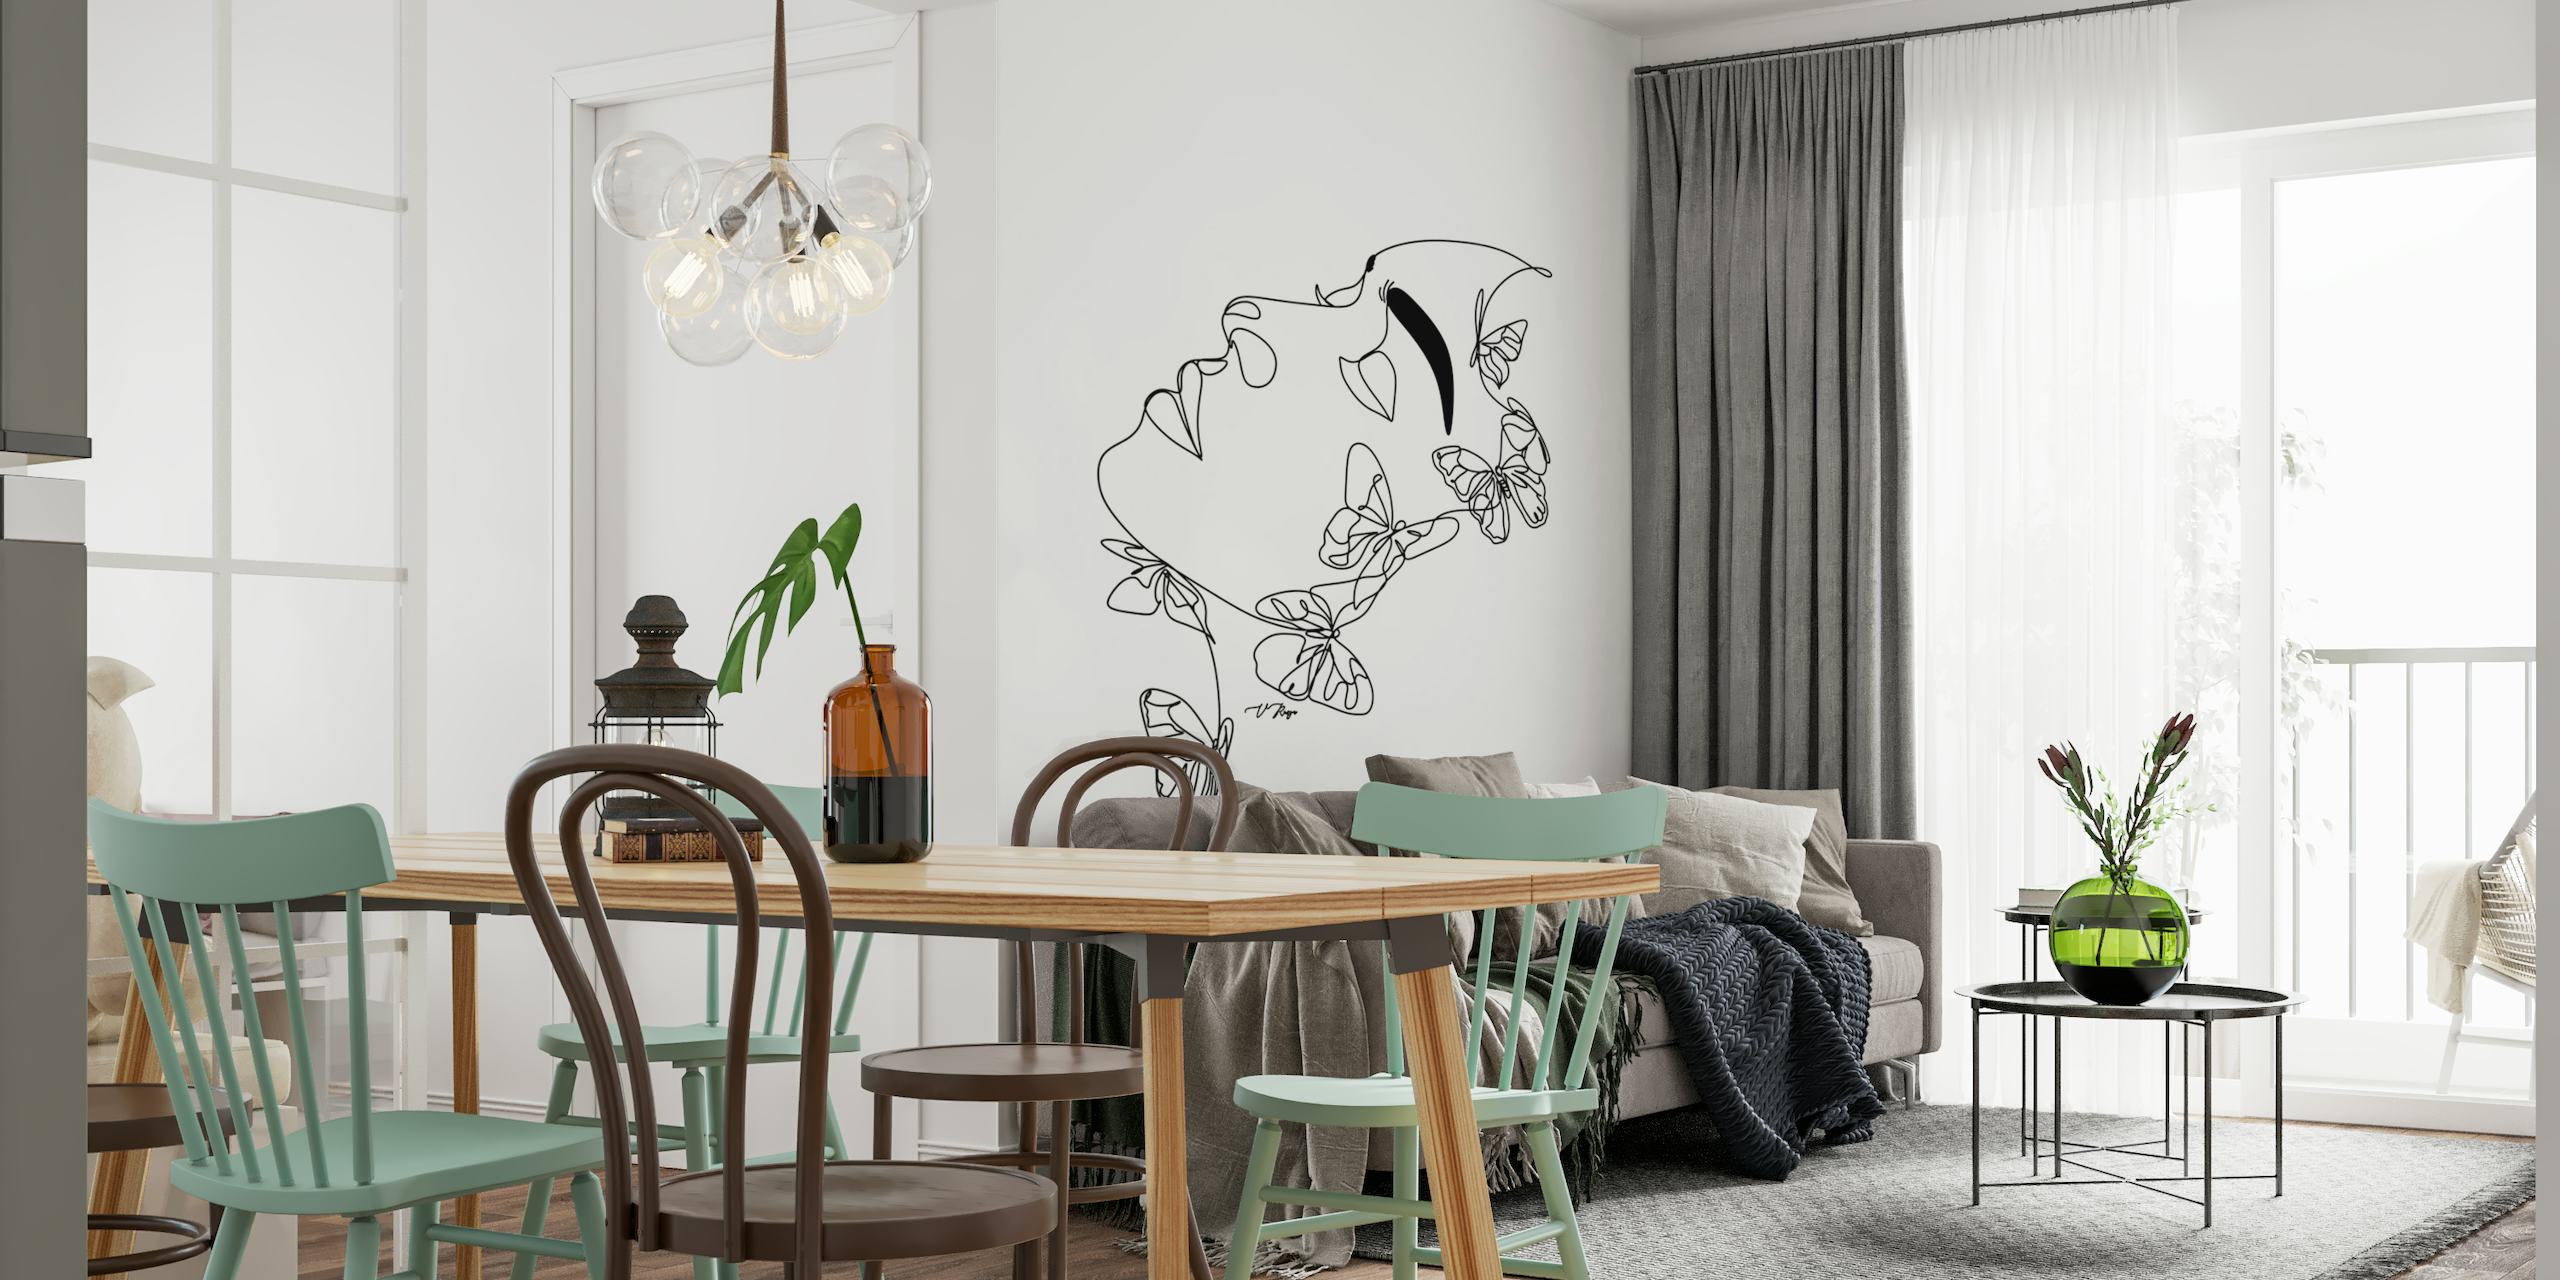 Line art wall mural featuring a silhouette of a face surrounded by butterflies